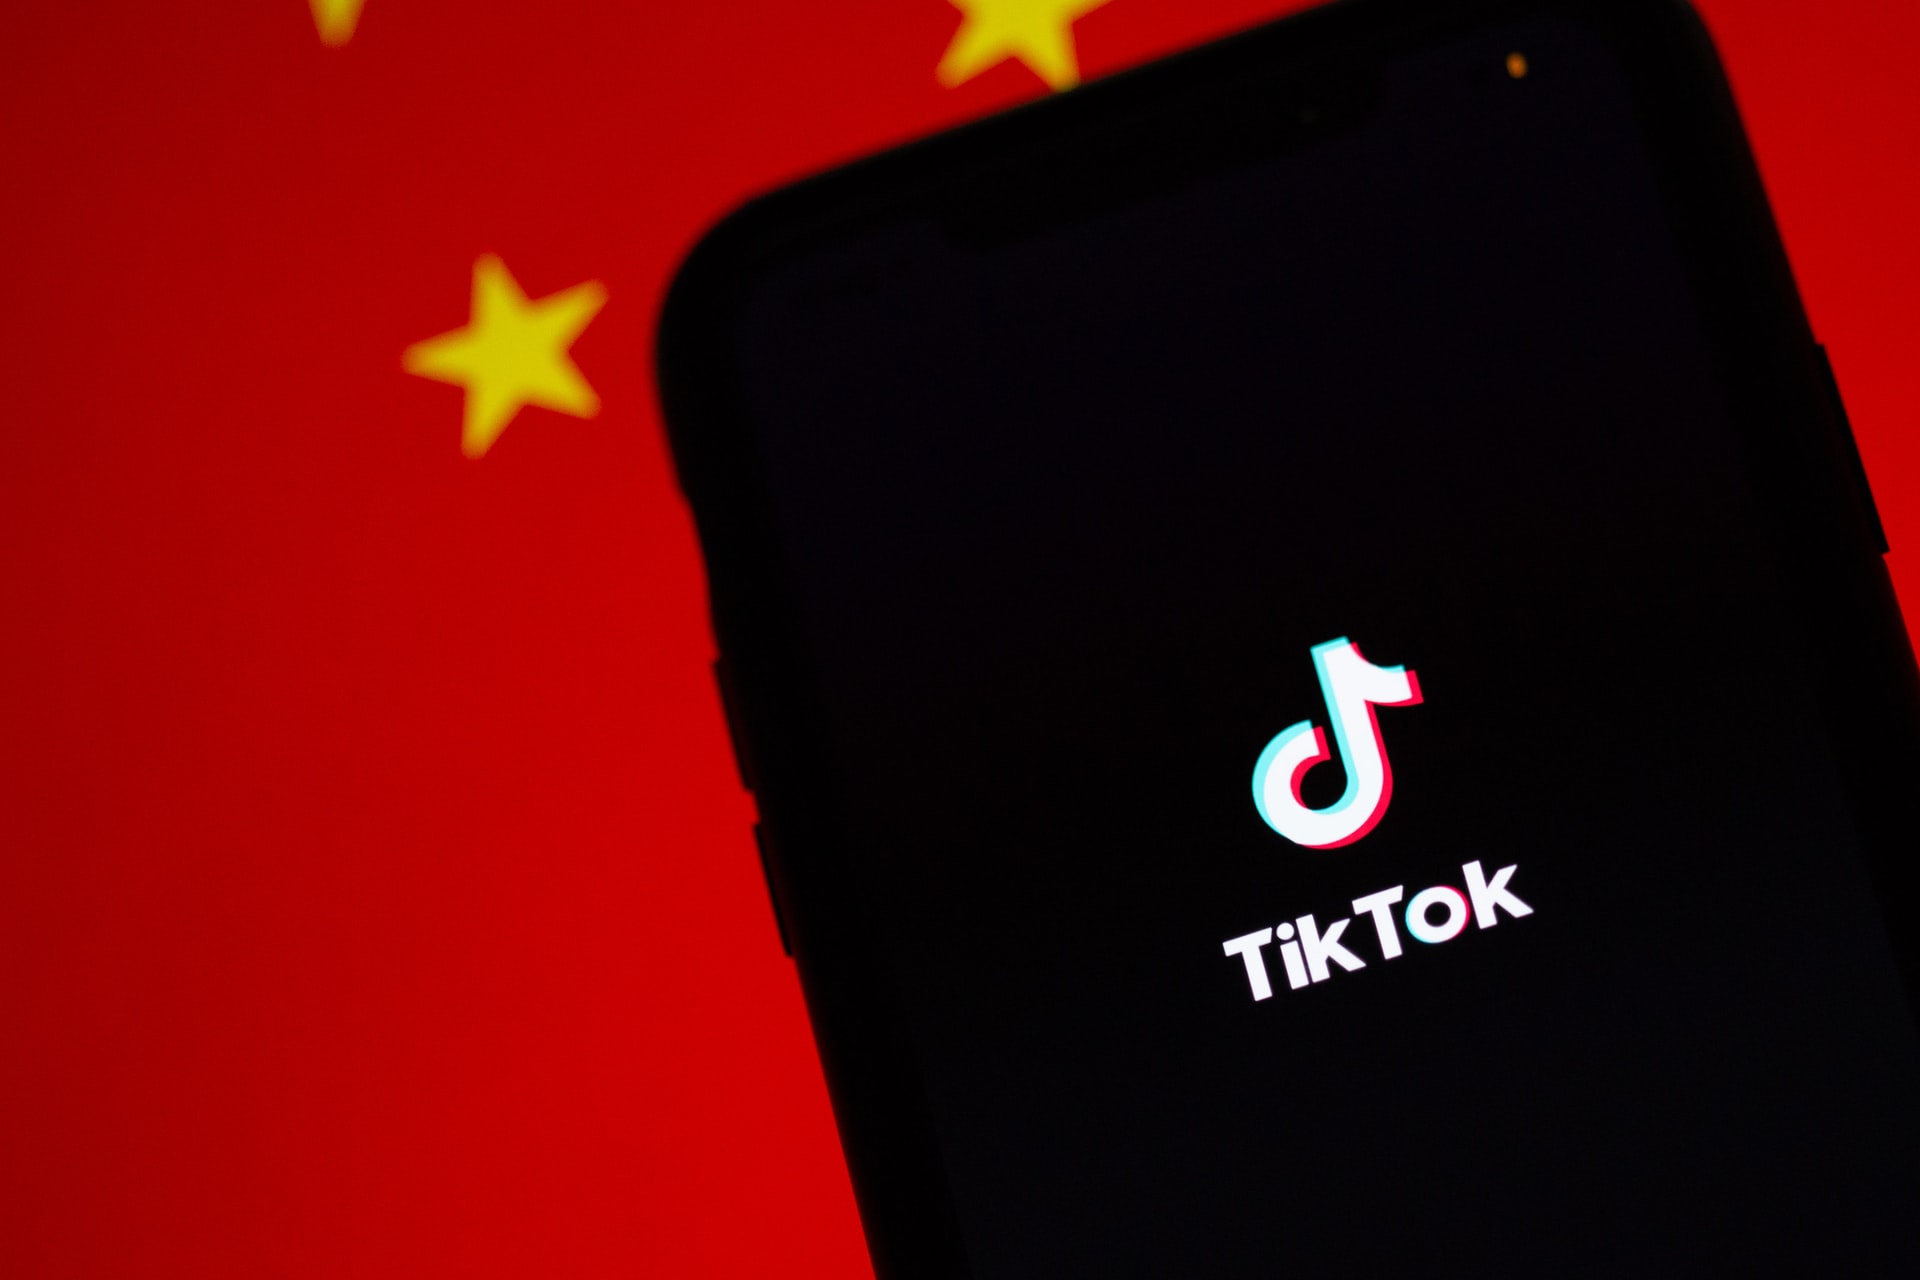 Reportedly TikTok Now Reached 3 Billion Total Installs Globally